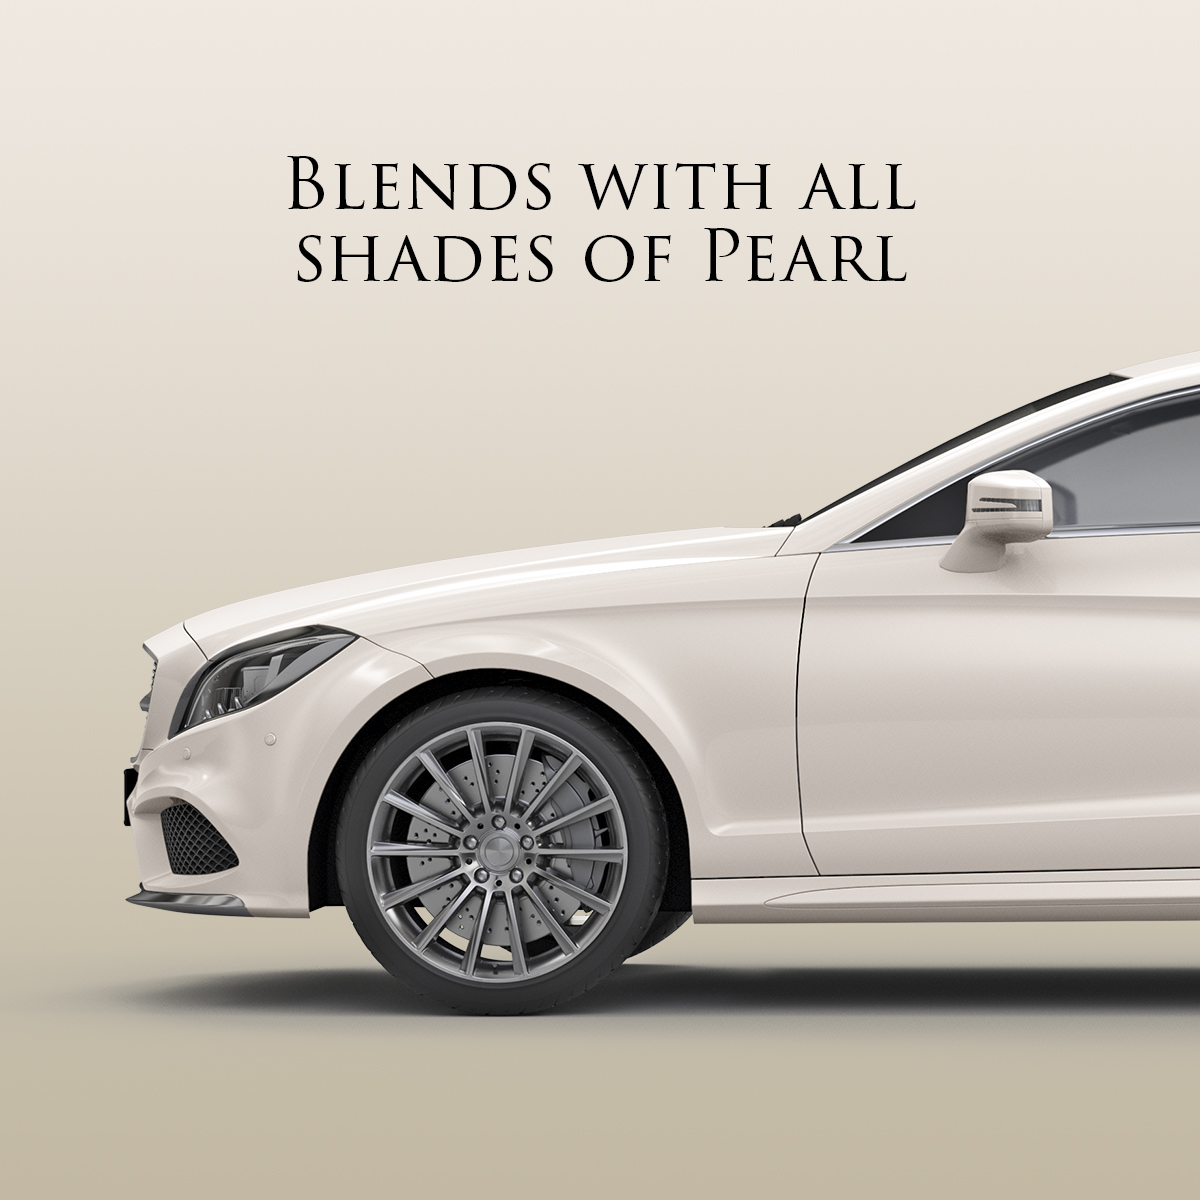 Blends with all shades of pearl